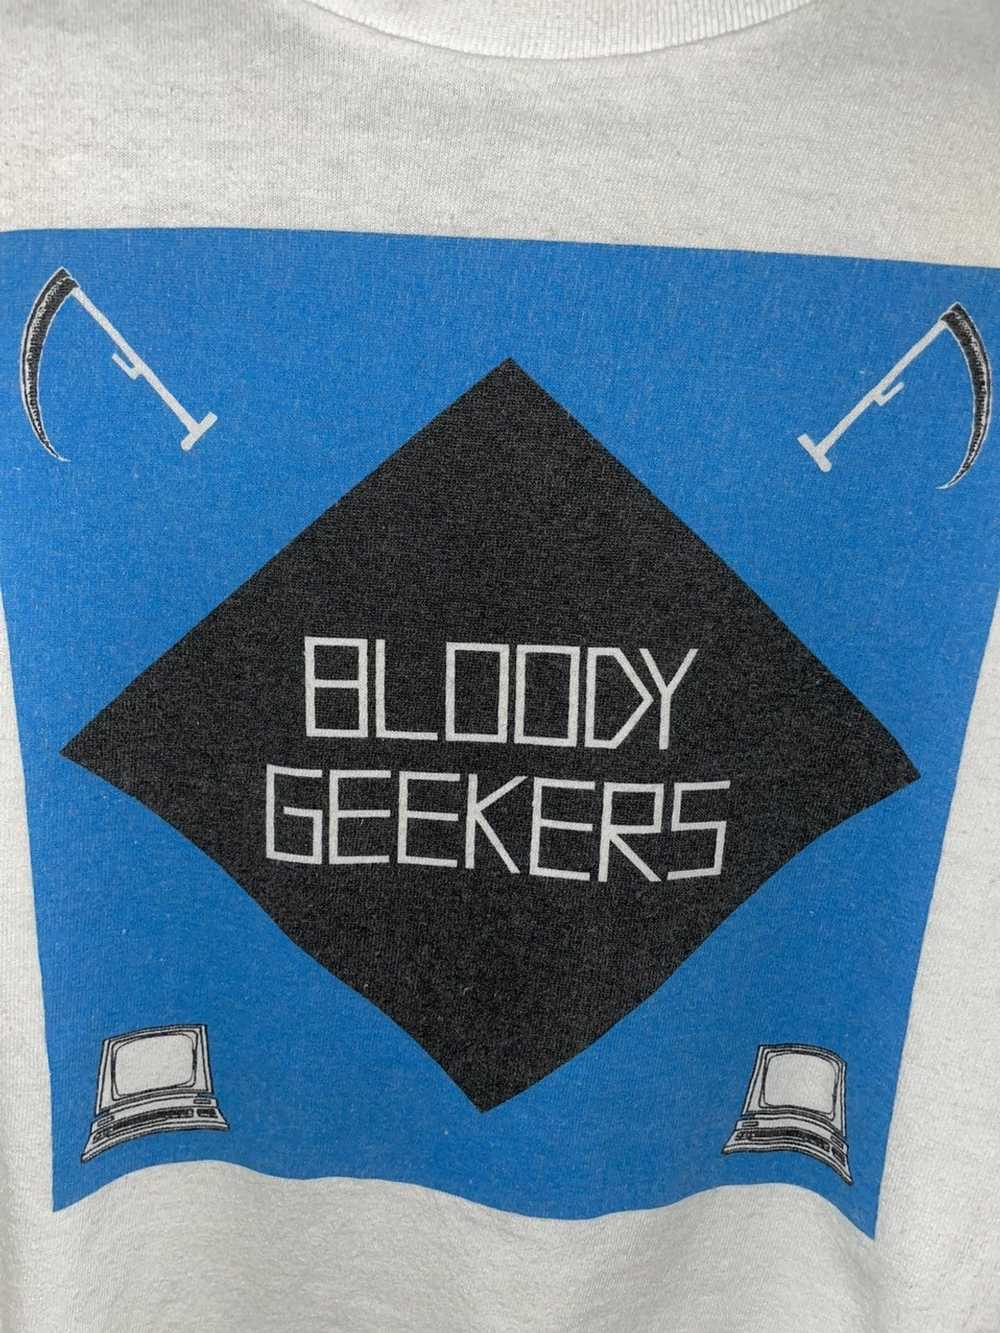 Undercover Undercover Bloody Geekers T Shirt - image 2